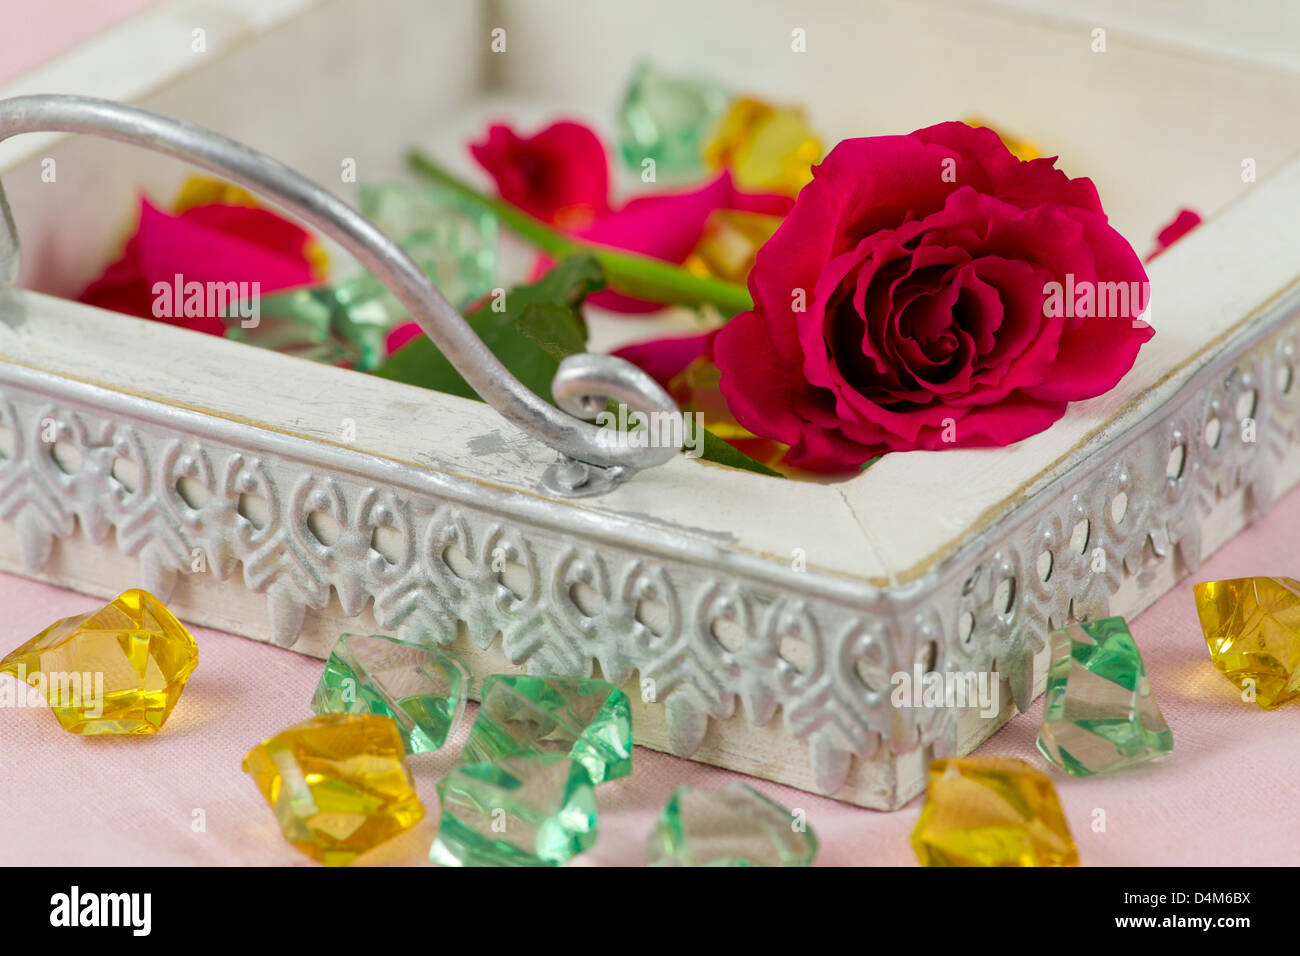 vintage tray with red rose, rose petals and crystals Stock Photo